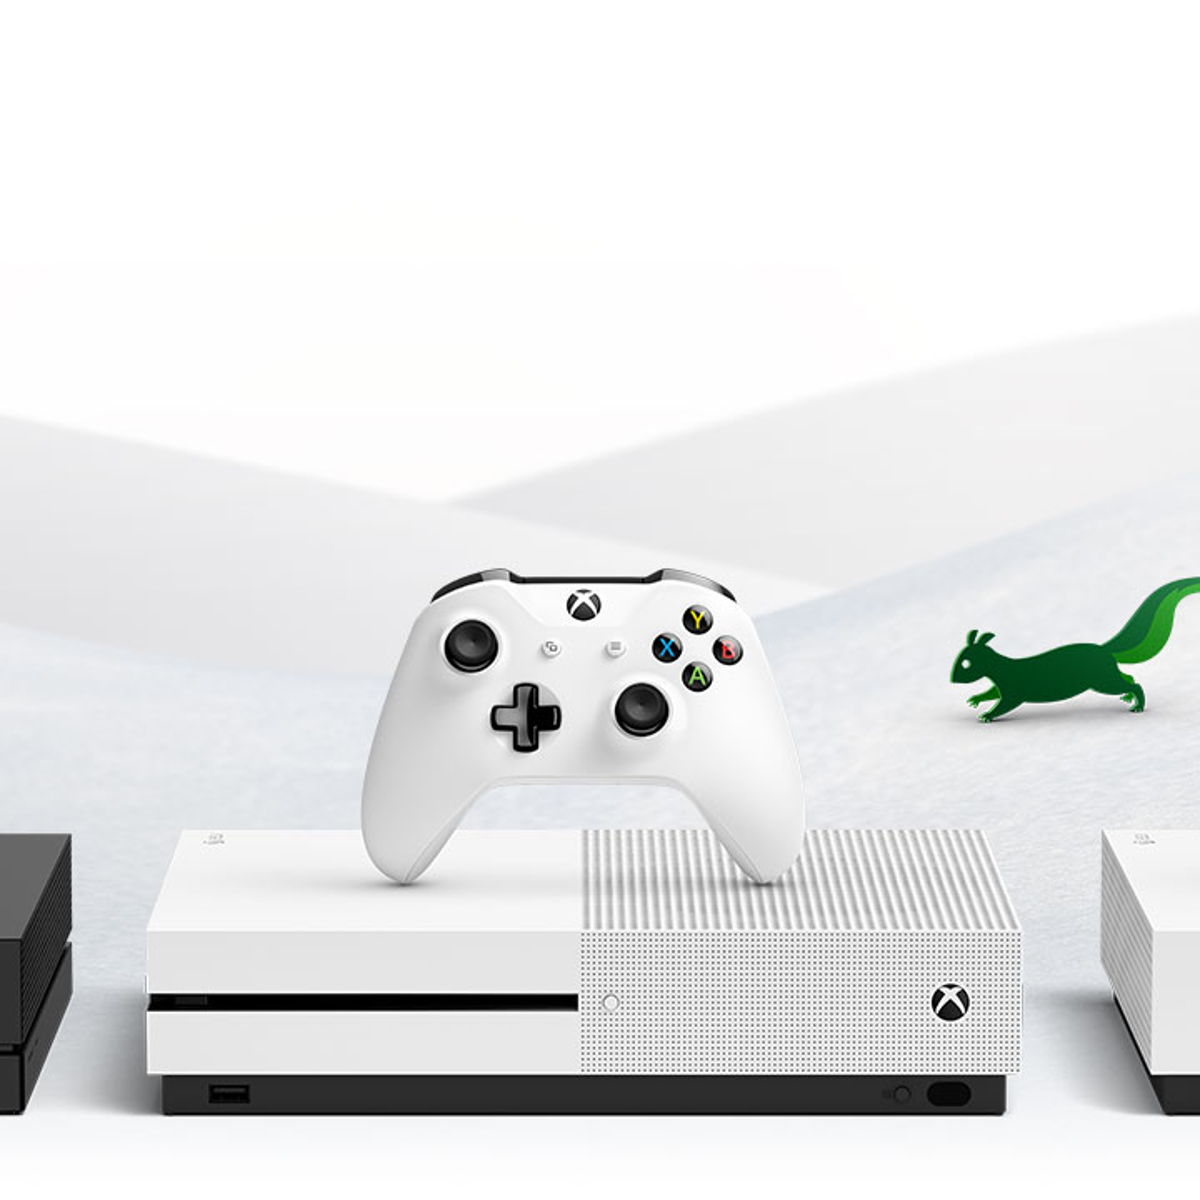 Xbox Gift Guide 2019: Xbox One consoles, top games, accessories, merch and  more